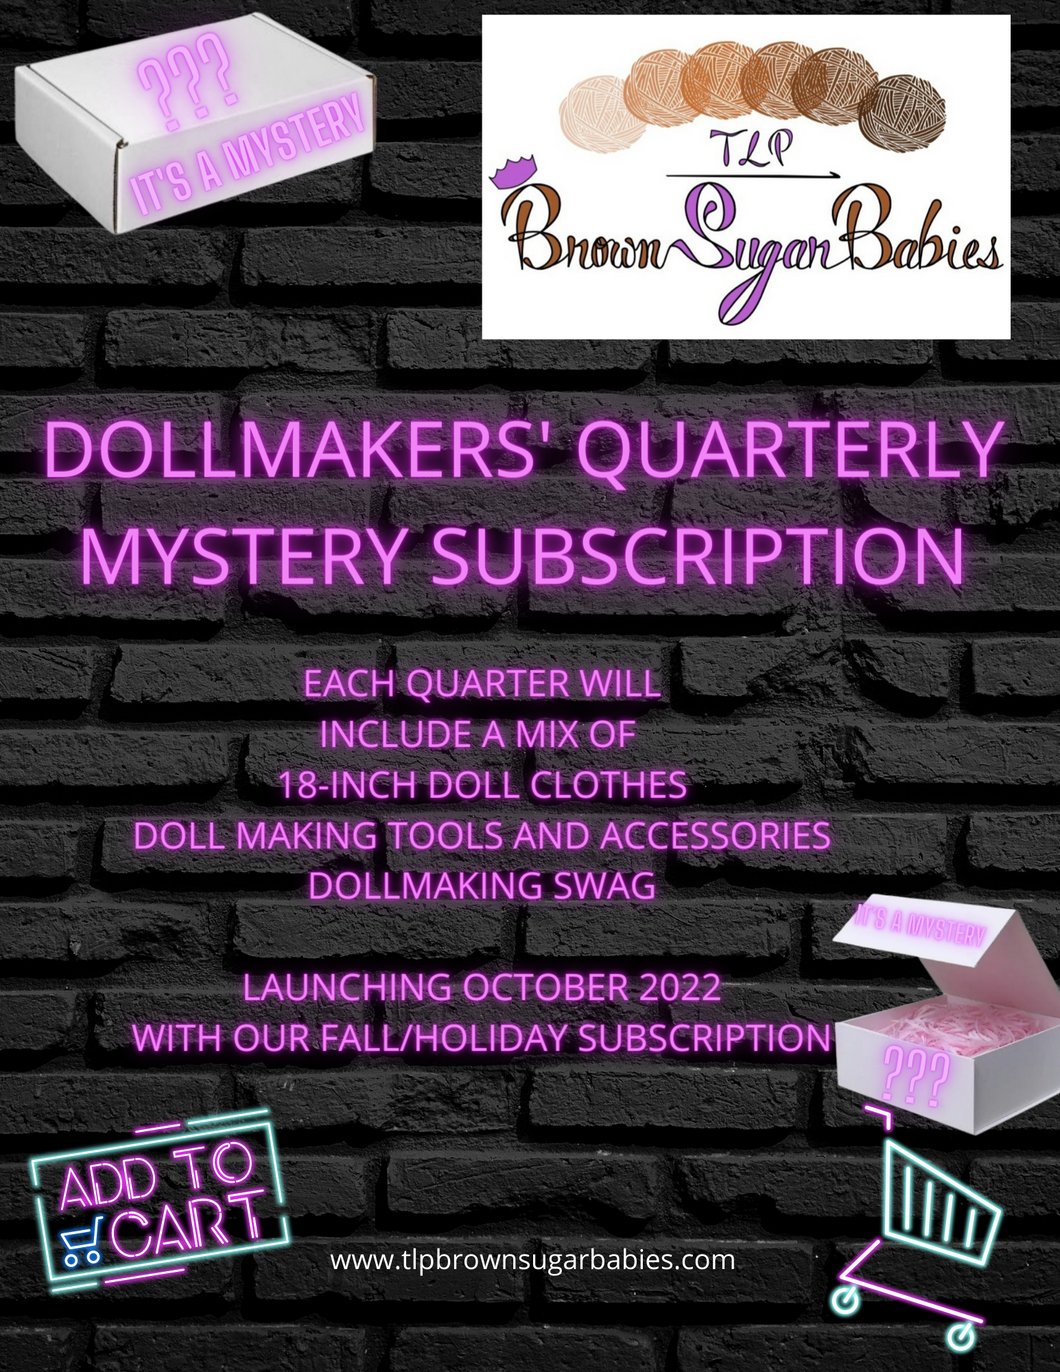 Dollmakers' Quarterly Mystery Subscription